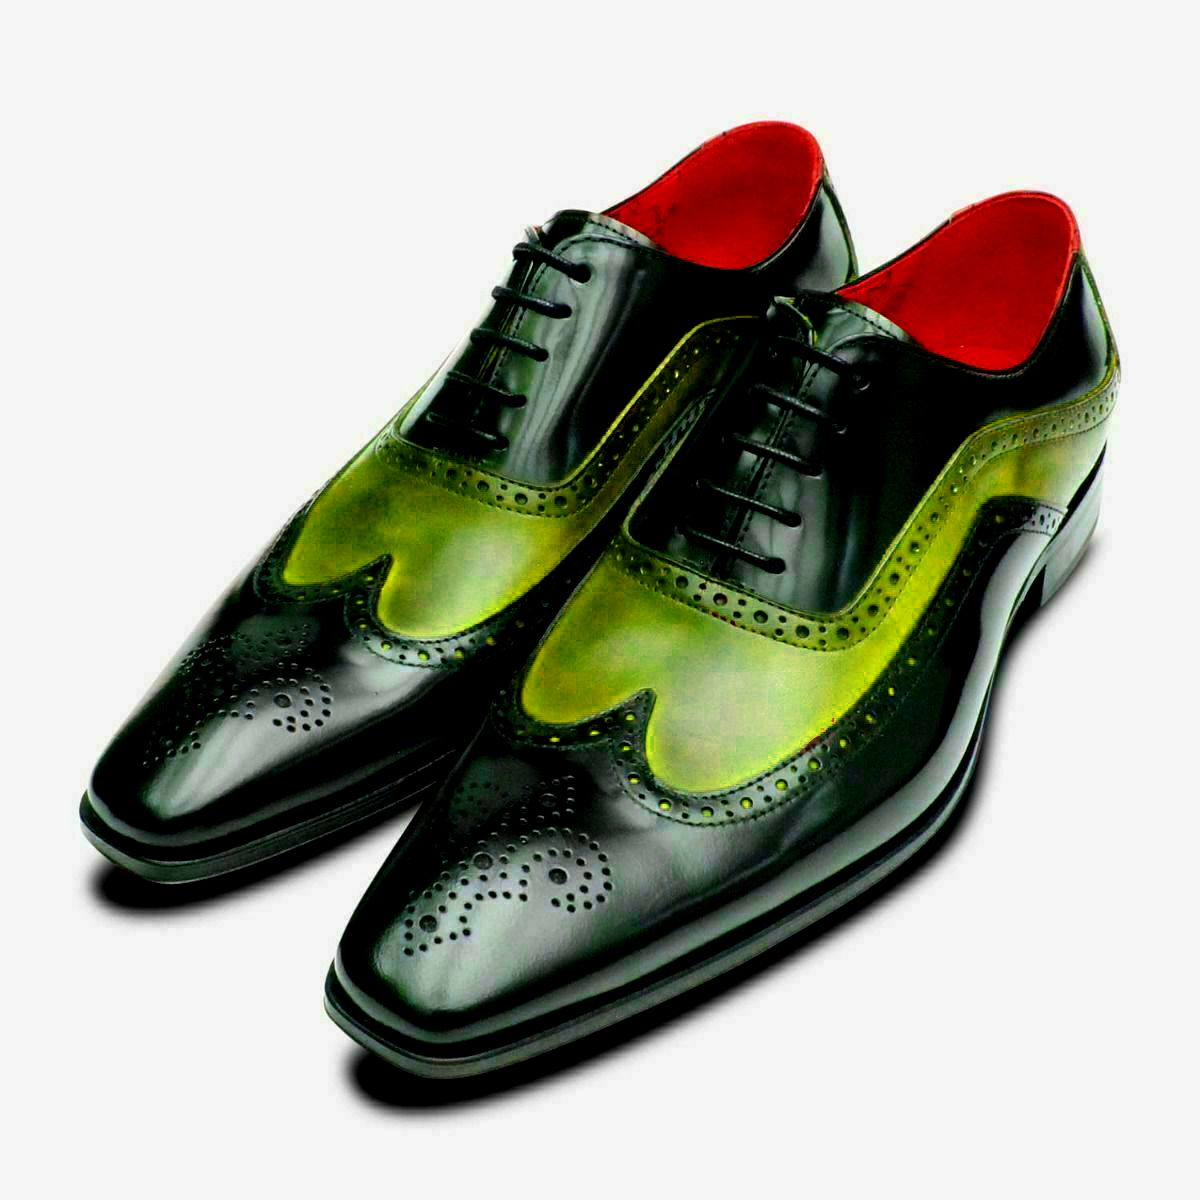 Two Tone Wingtip Oxford Shoe For Men Medallion Toe Lace Up Real Leather Handmade